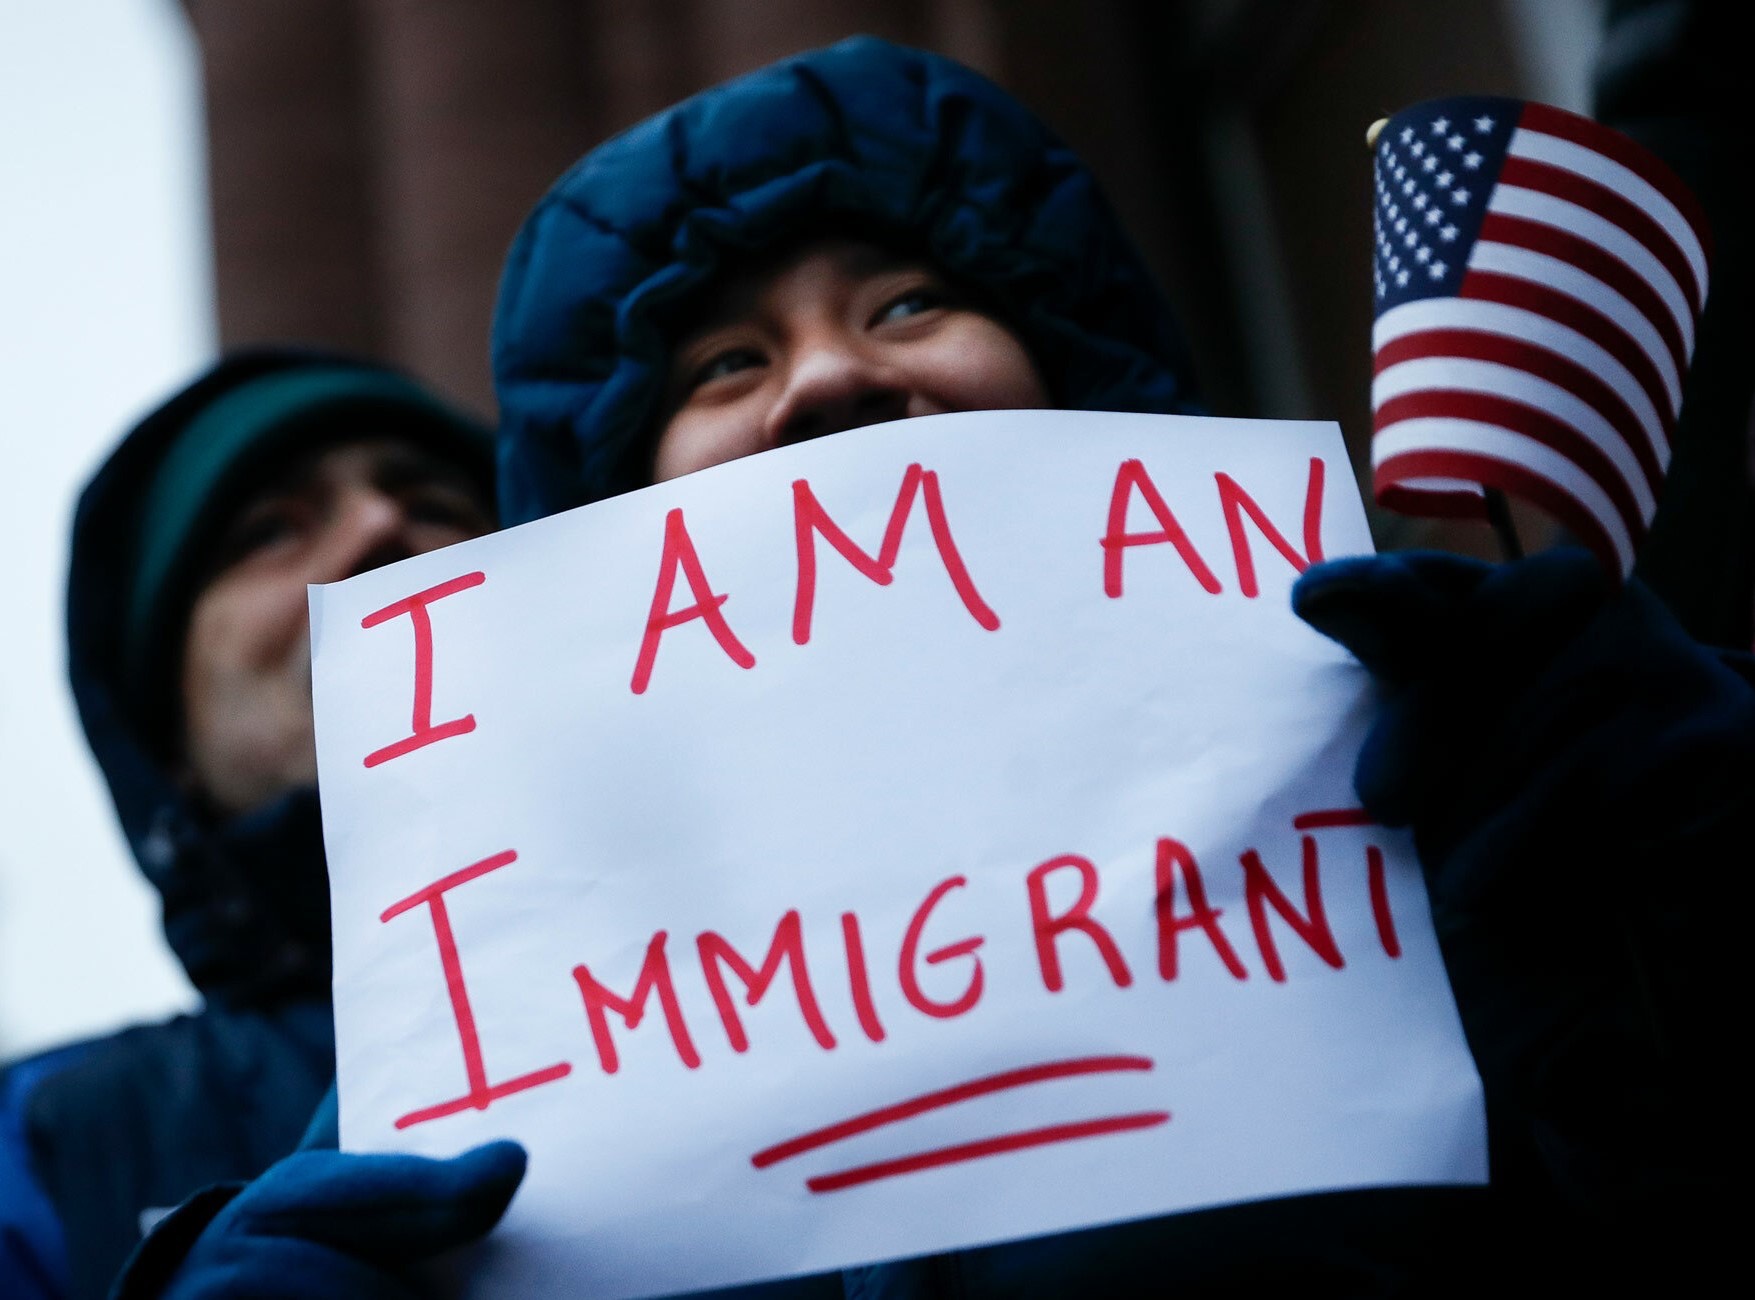 Person holding a sign saying "I am an immigrant" and an American flag